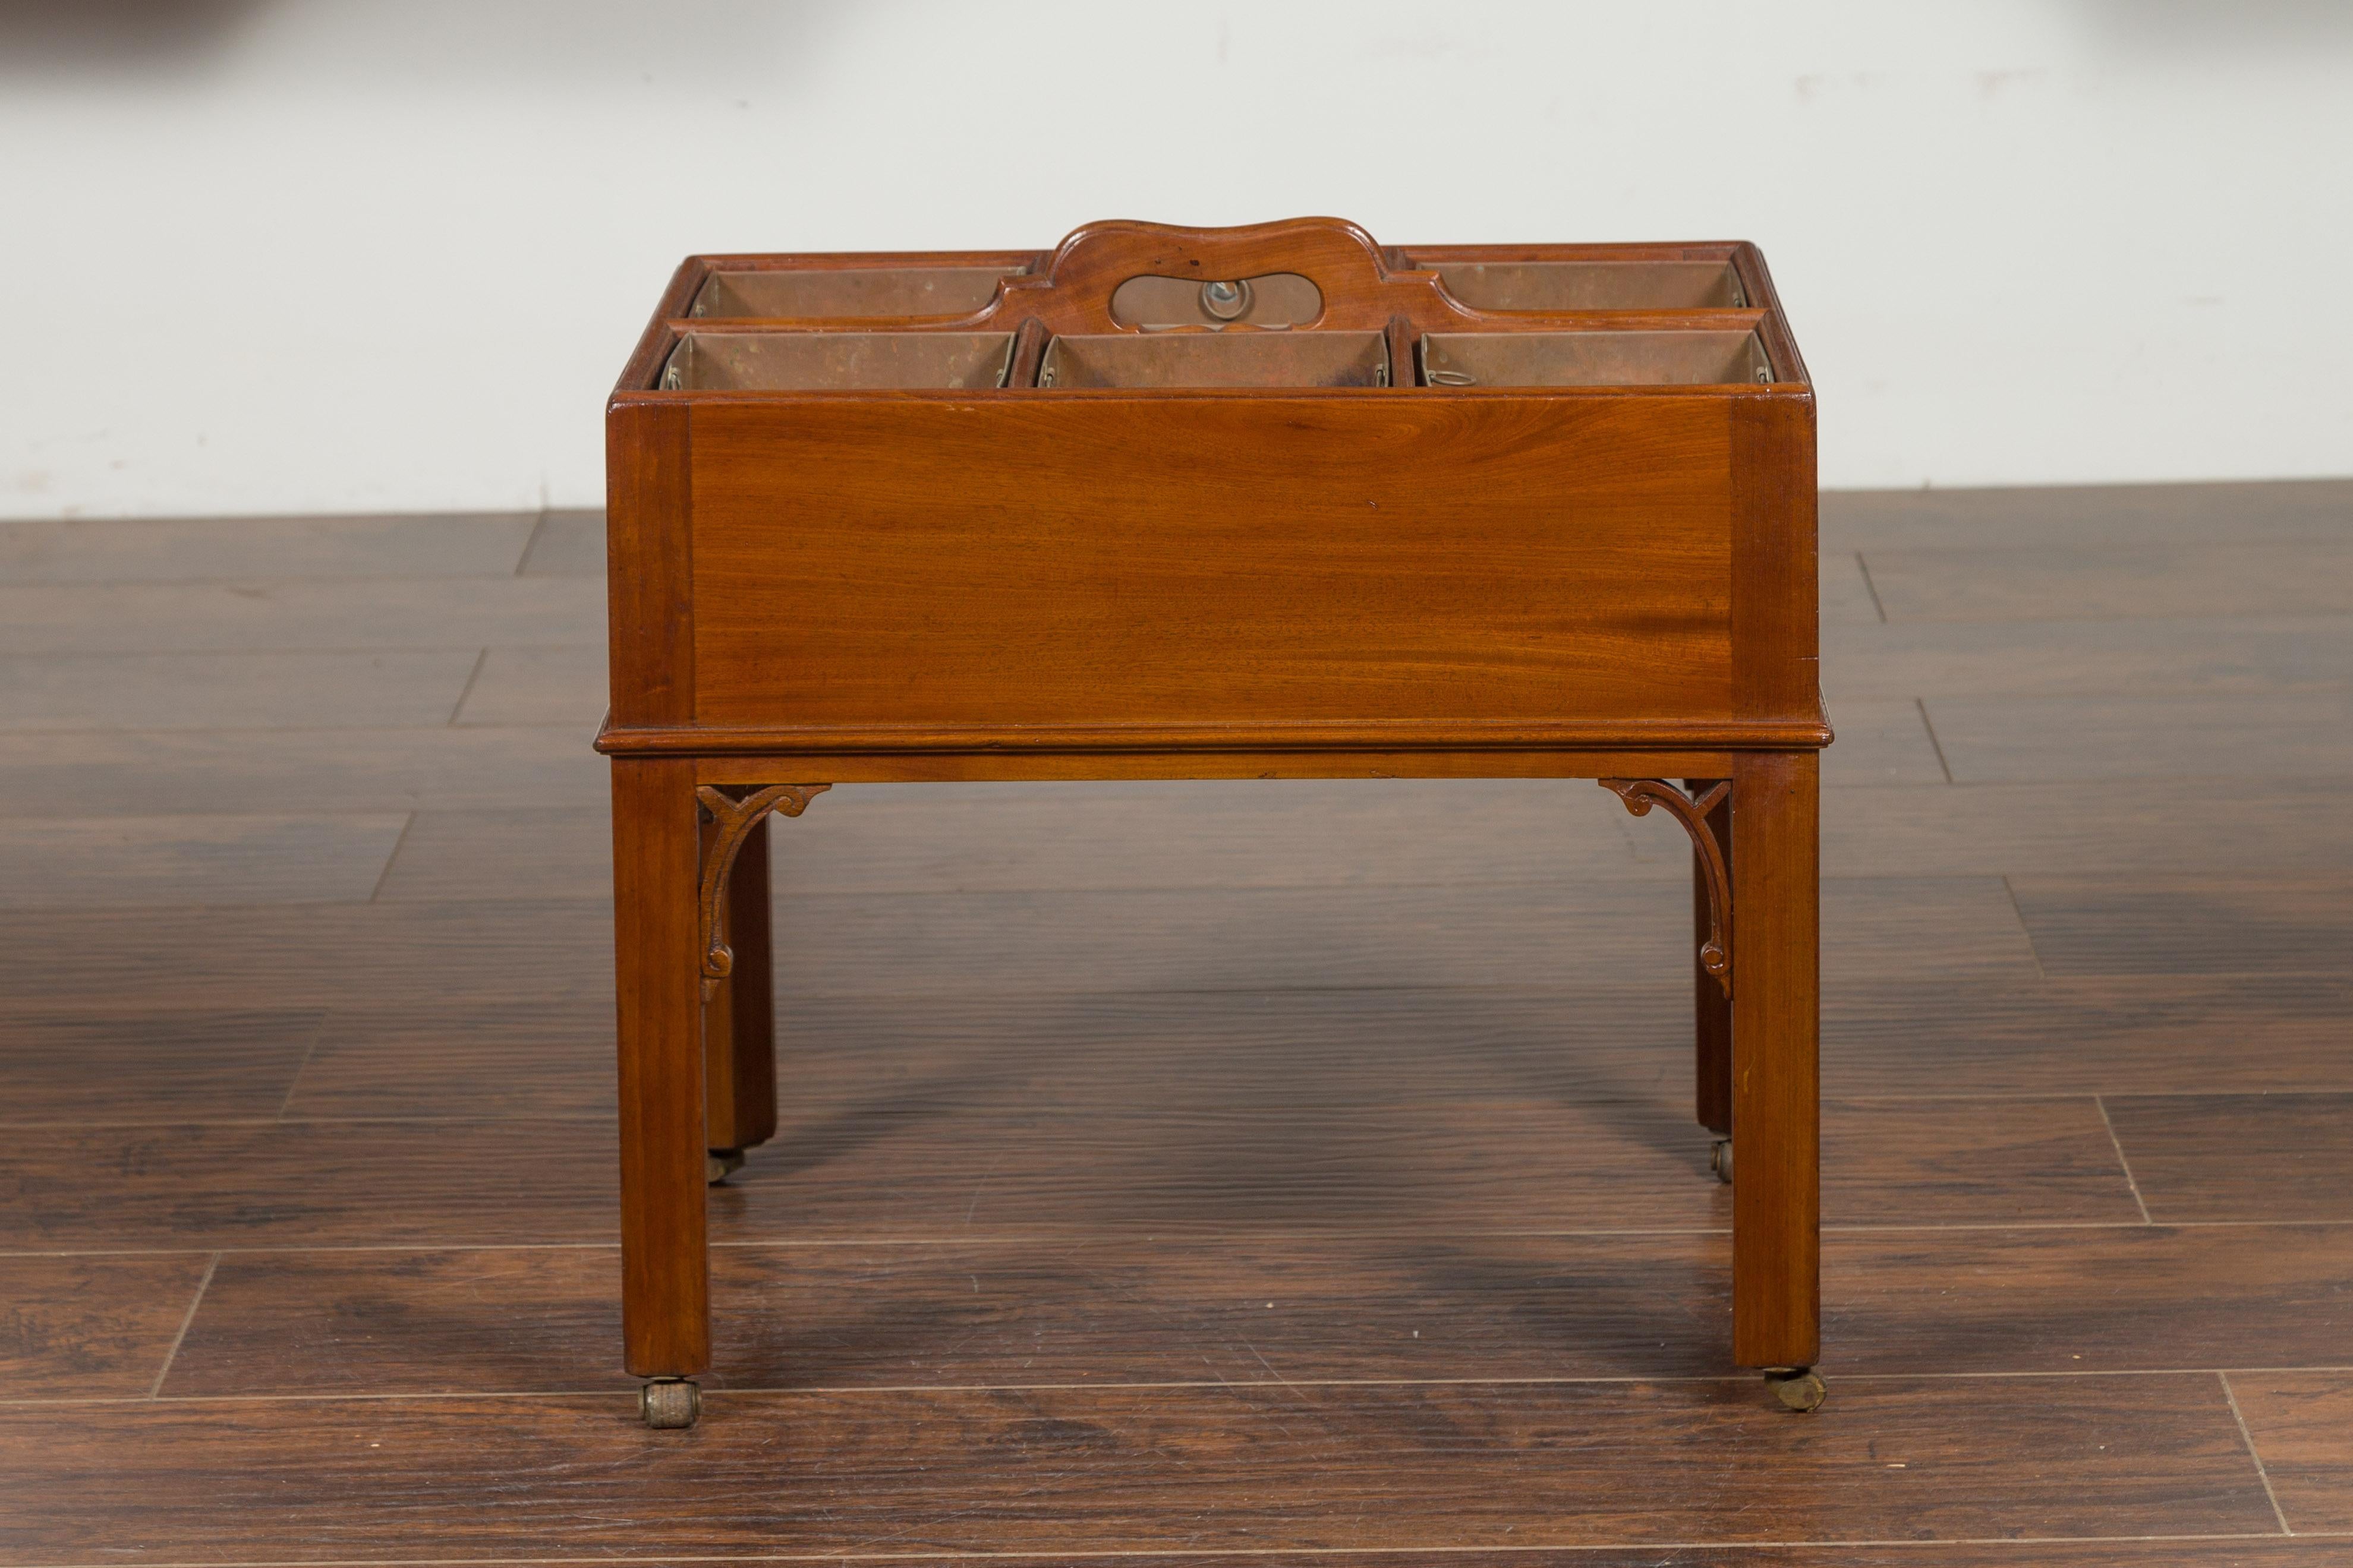 An English mahogany copper lined wine caddy from the mid-19th century, with carved spandrels and casters. Created in England during the third quarter of the 19th century, this wine caddy features a rectangular partitioned top securing six removable